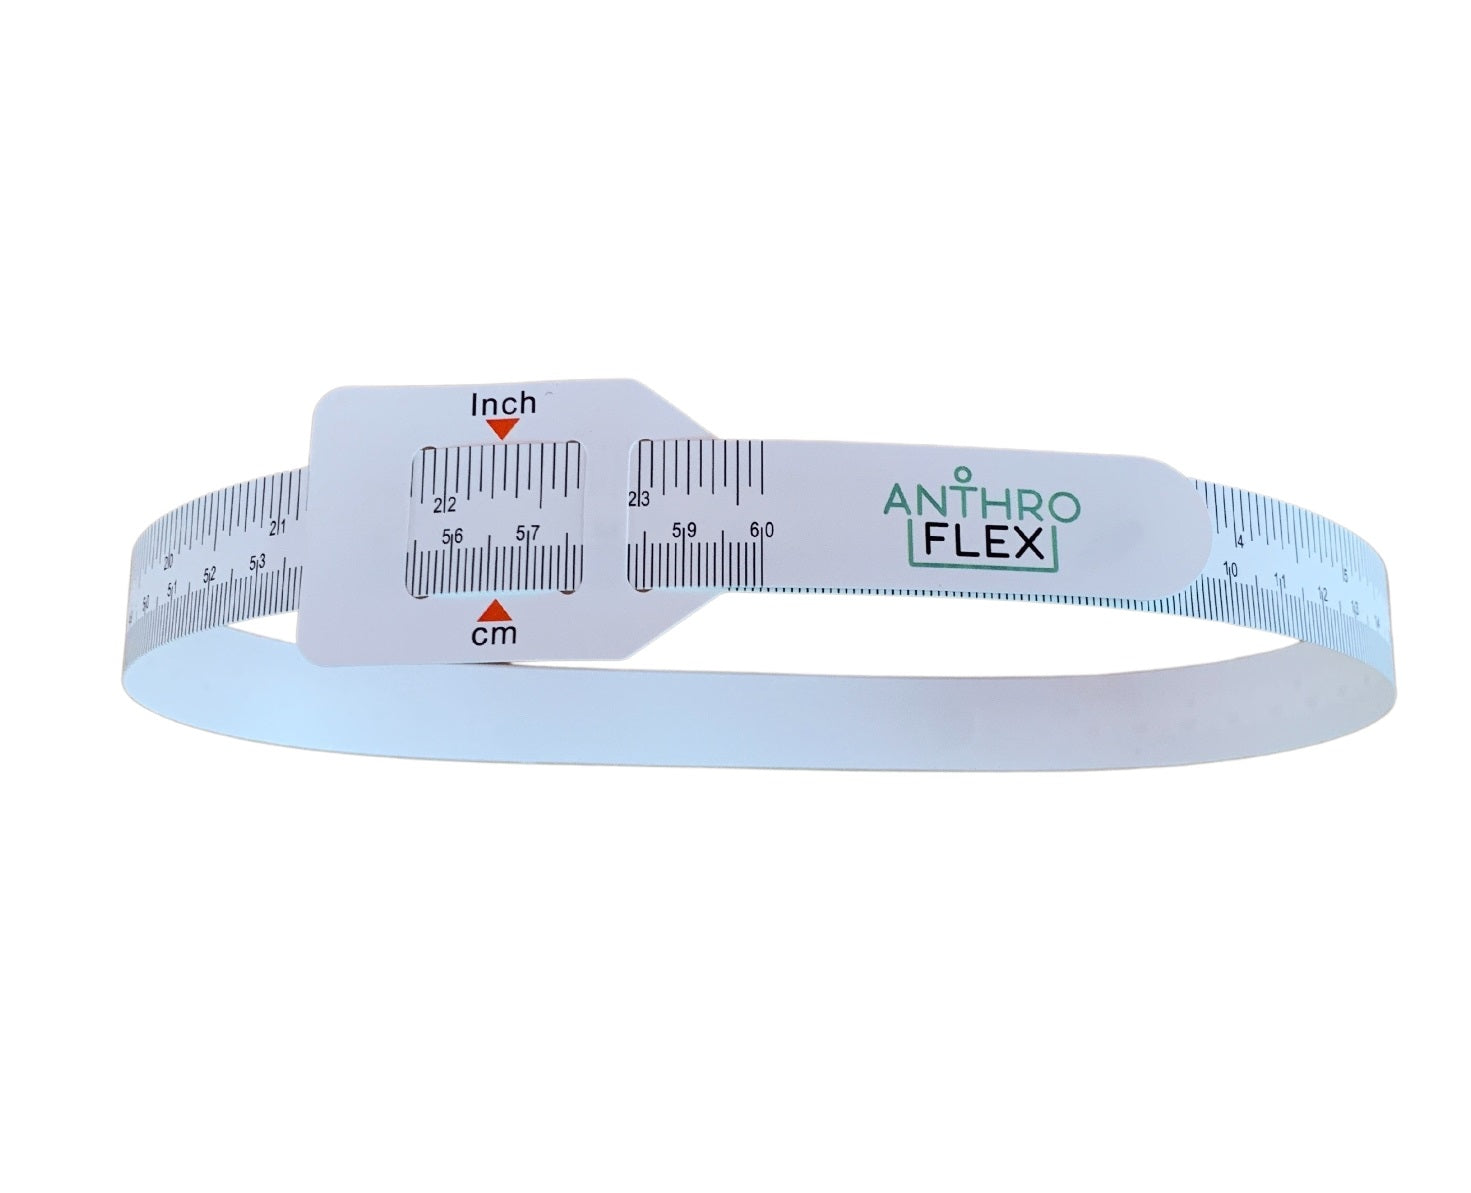 AnthroFlex Circumference Tape Measure for Infant Head or Adult Upper Arm